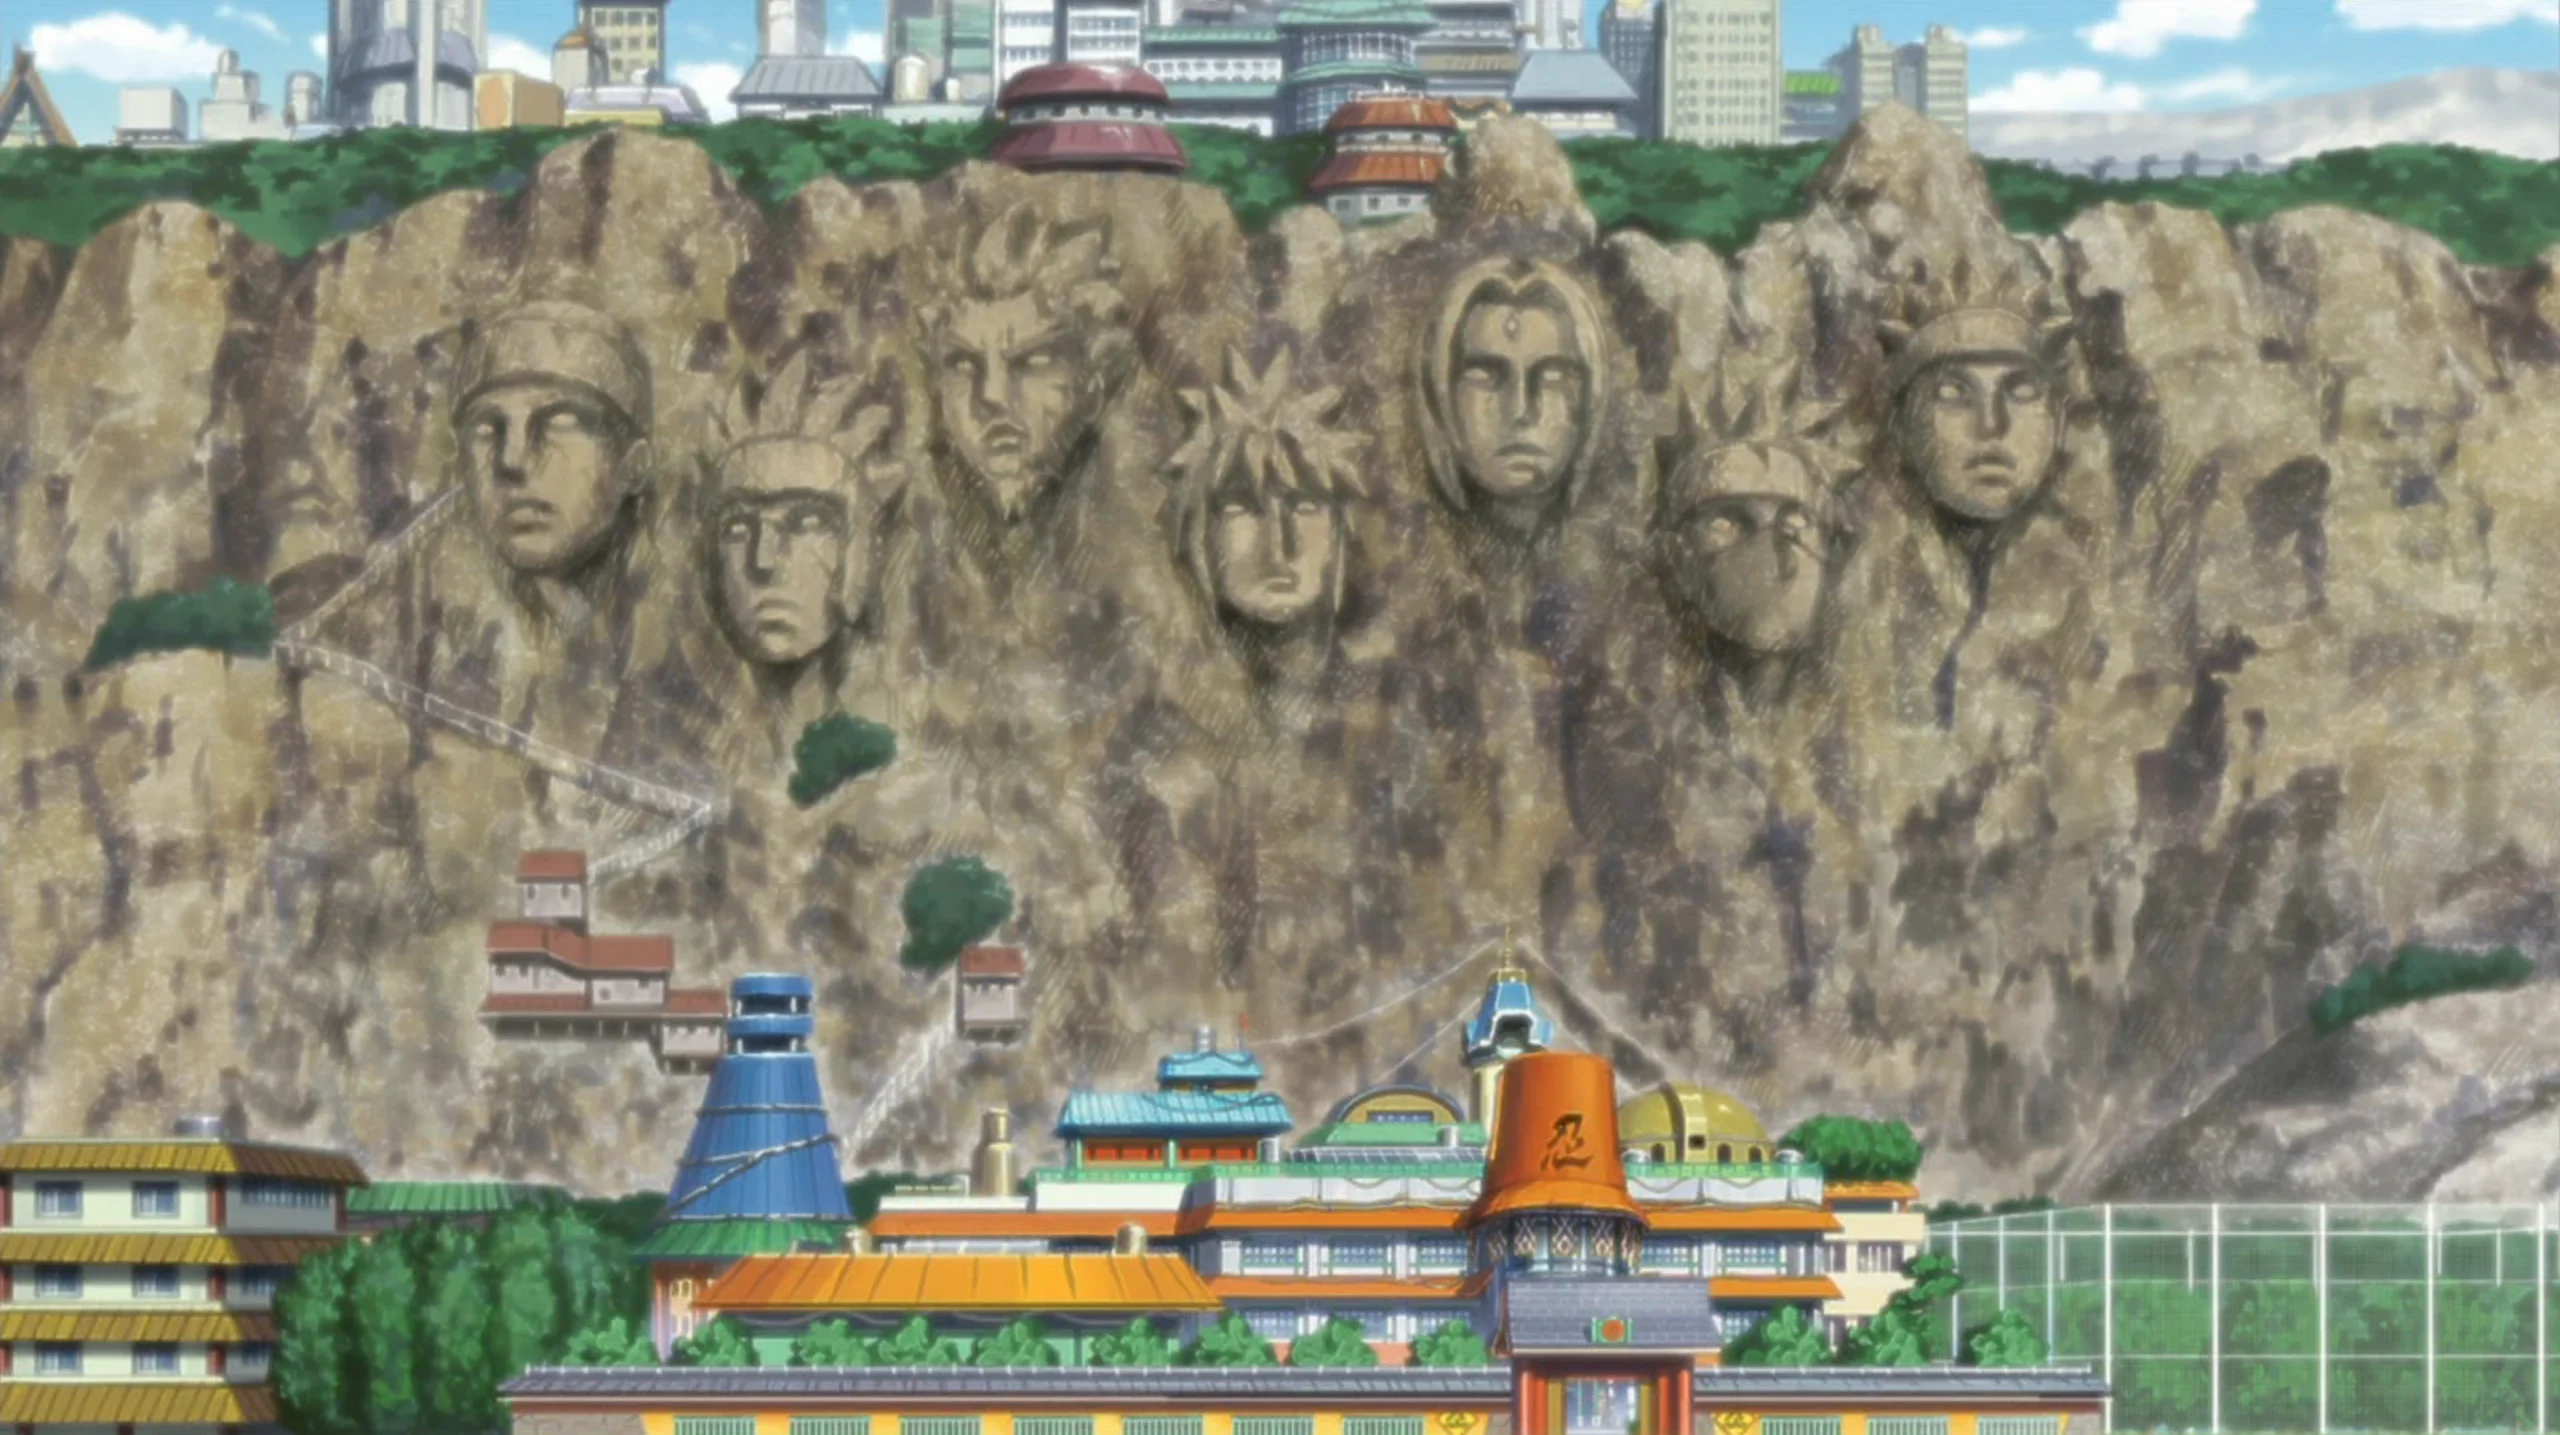 Hokages In Naruto and Boruto Listed In Order